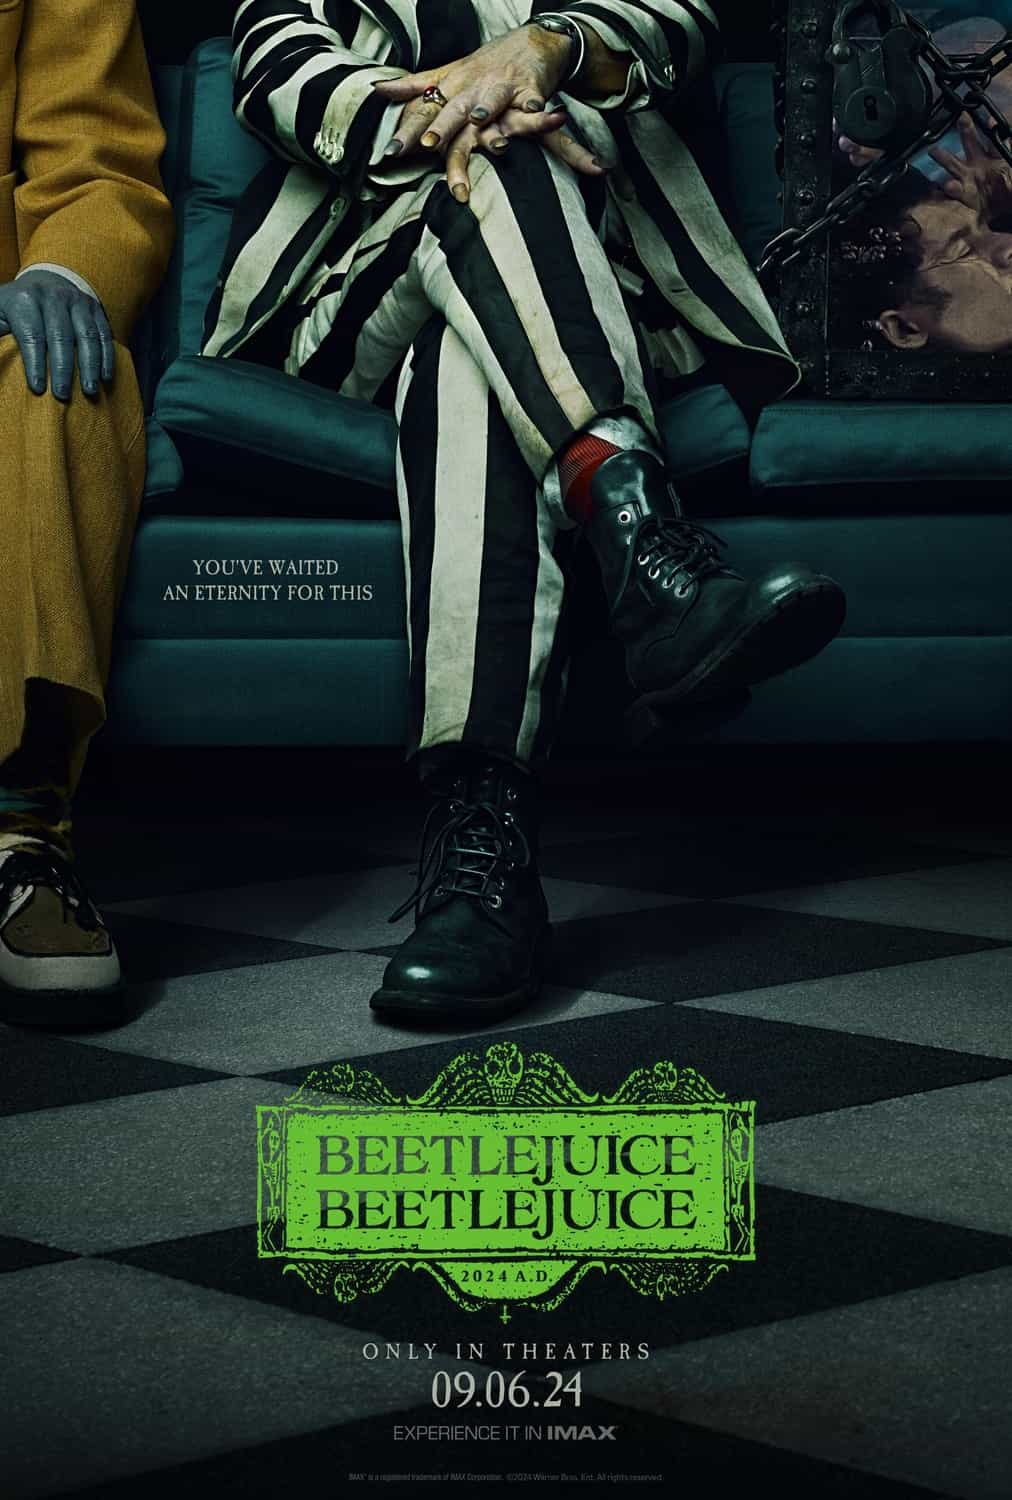 New poster has been released for Beetlejuice 2 which stars Michael Keaton and Jenna Ortega - movie UK release date 6th September 2024 #beetlejuice2